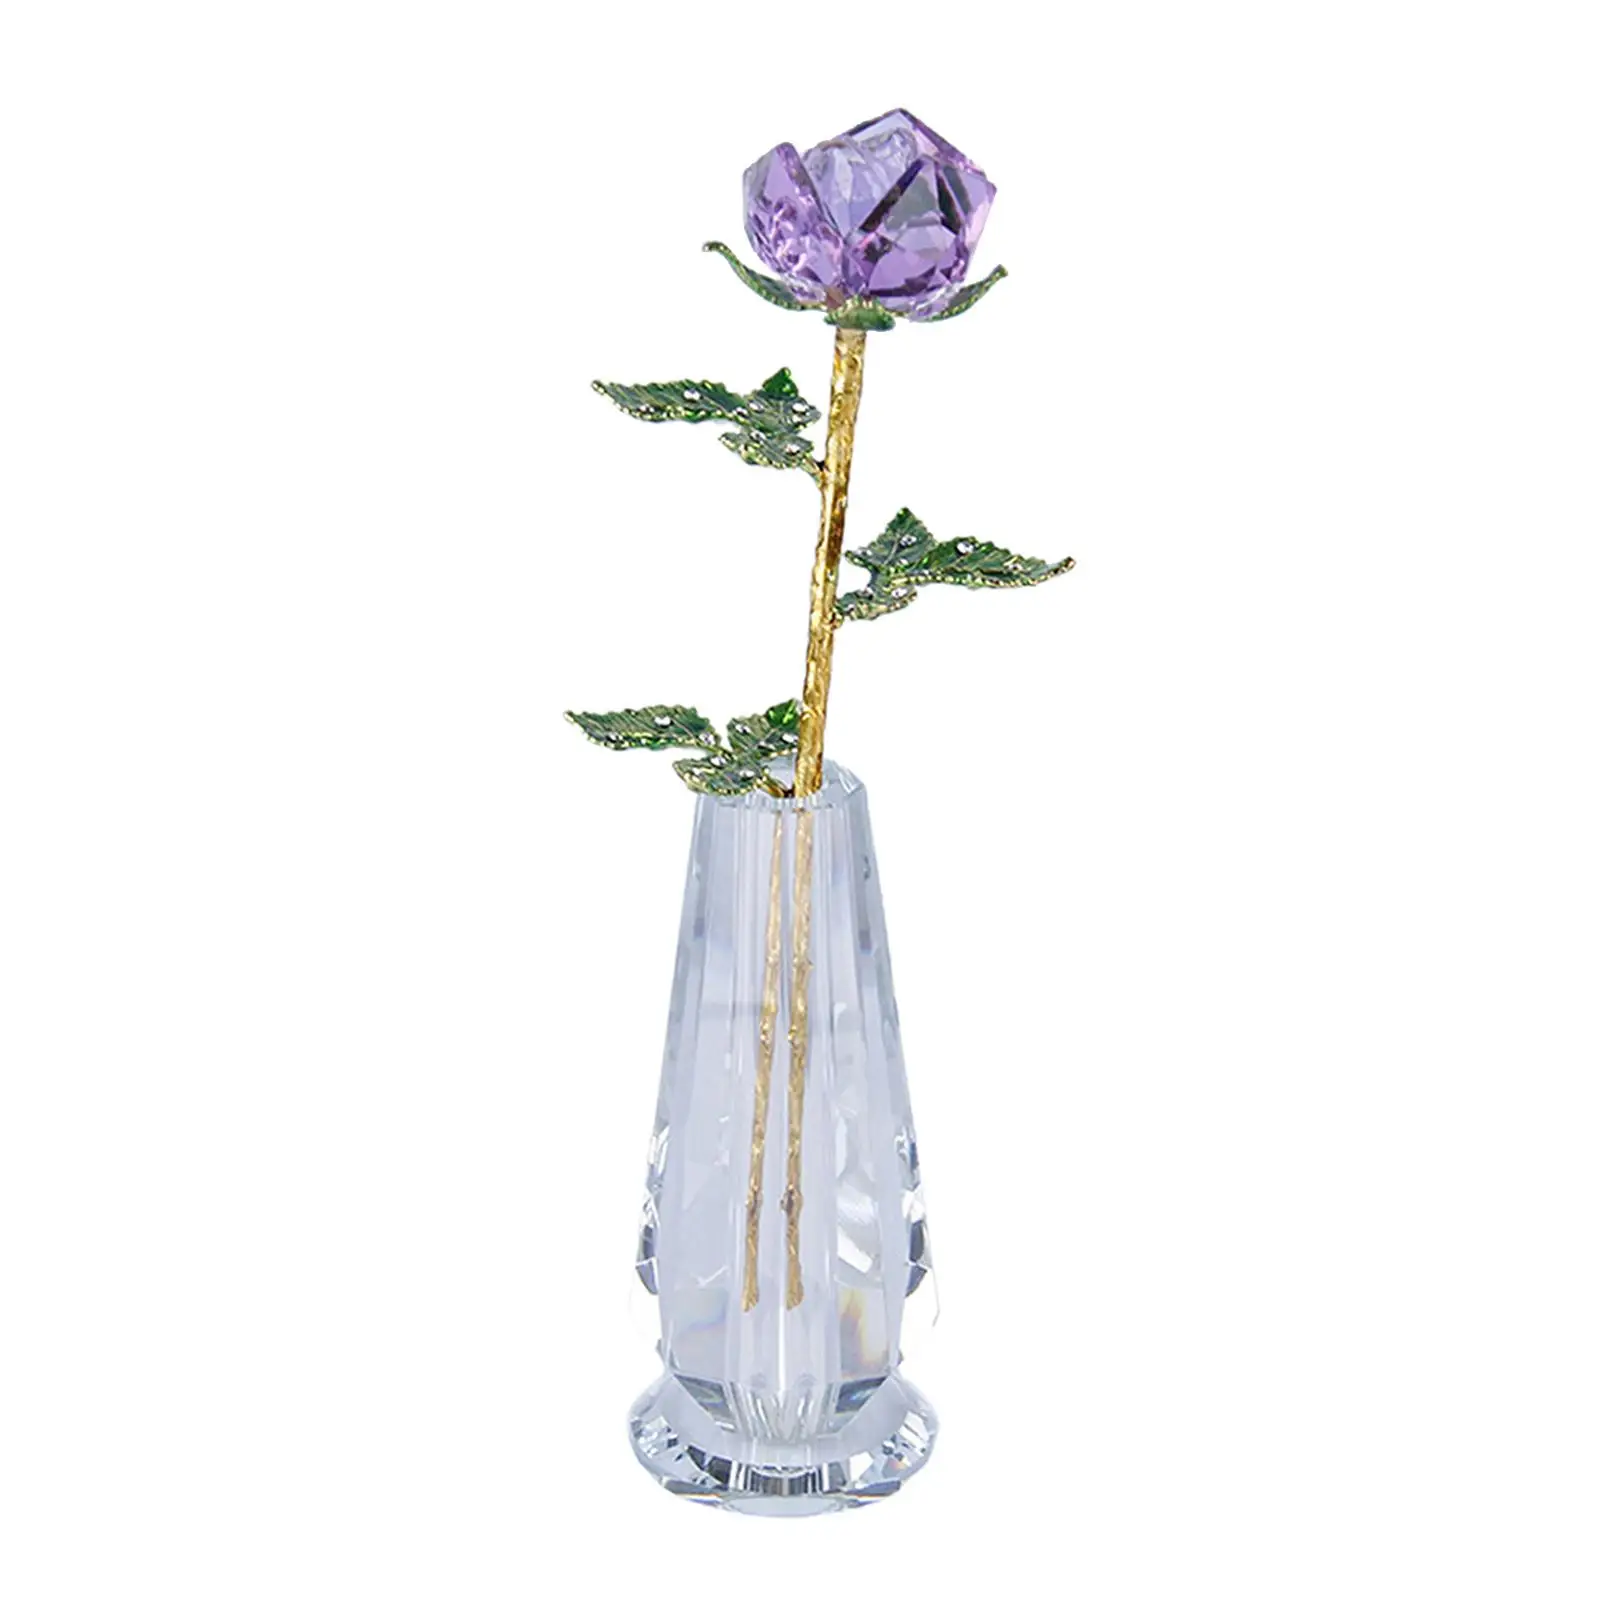 Unique Crystal Ornament Artwork Figurines for Birthday Home Women